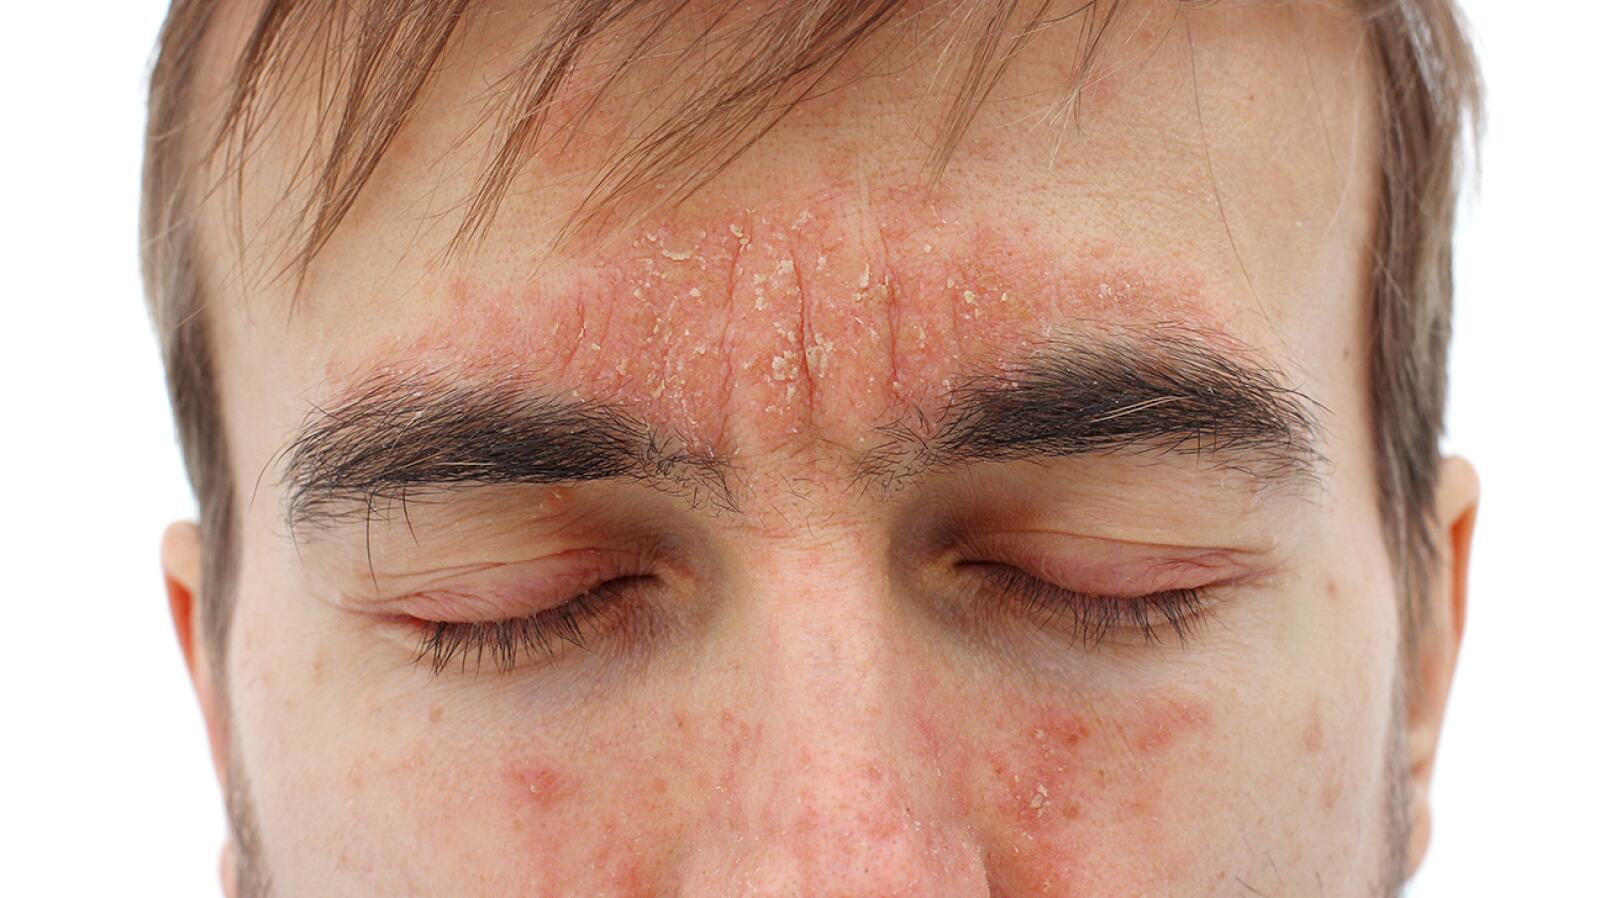 Eyelid Dermatitis Treatments Symptoms Causes And More 